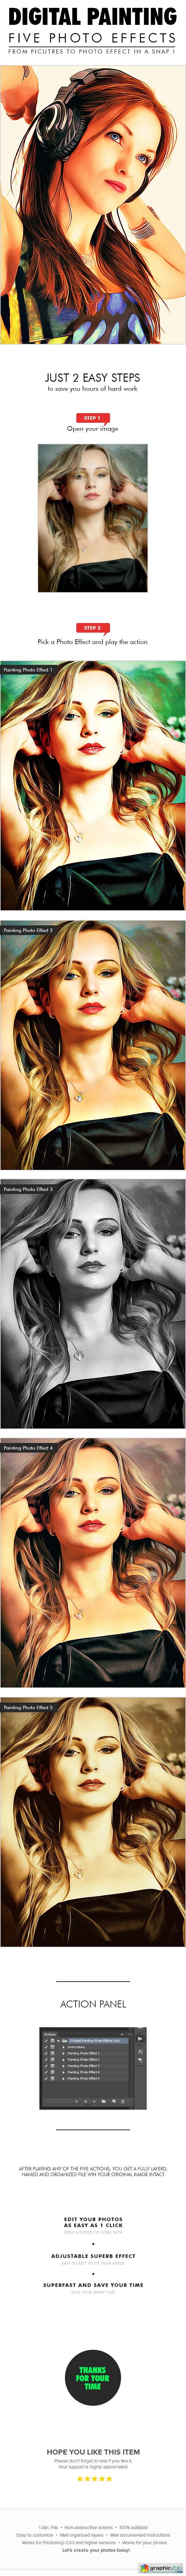 5 Digital Painting Photo Effects